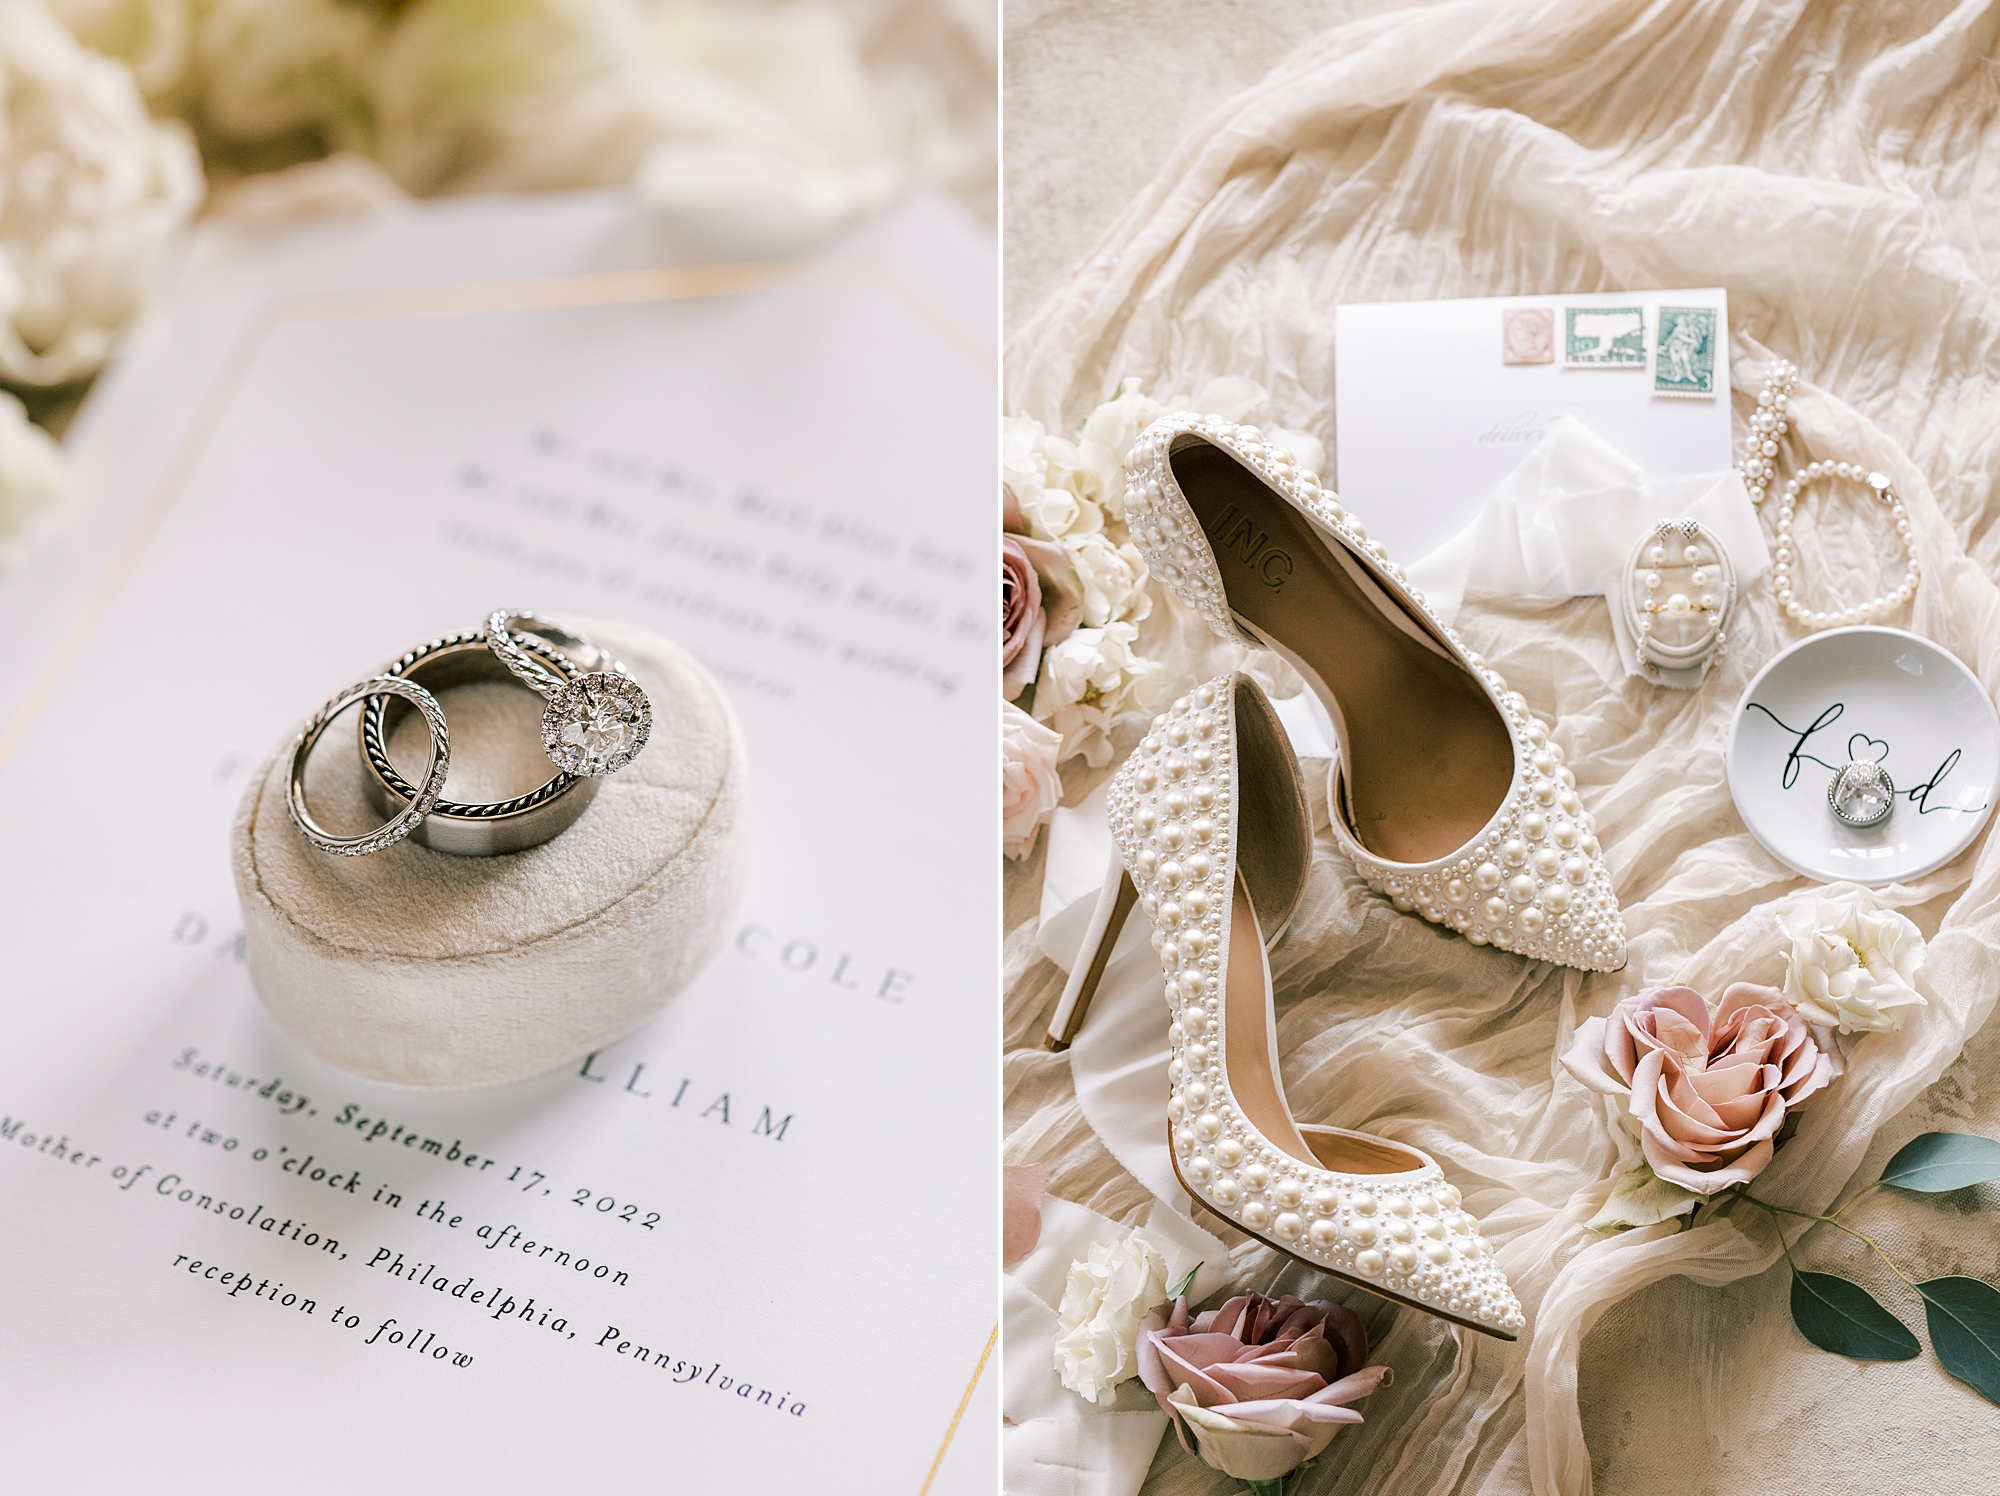 jewelry and shoes for bride for Philly wedding day